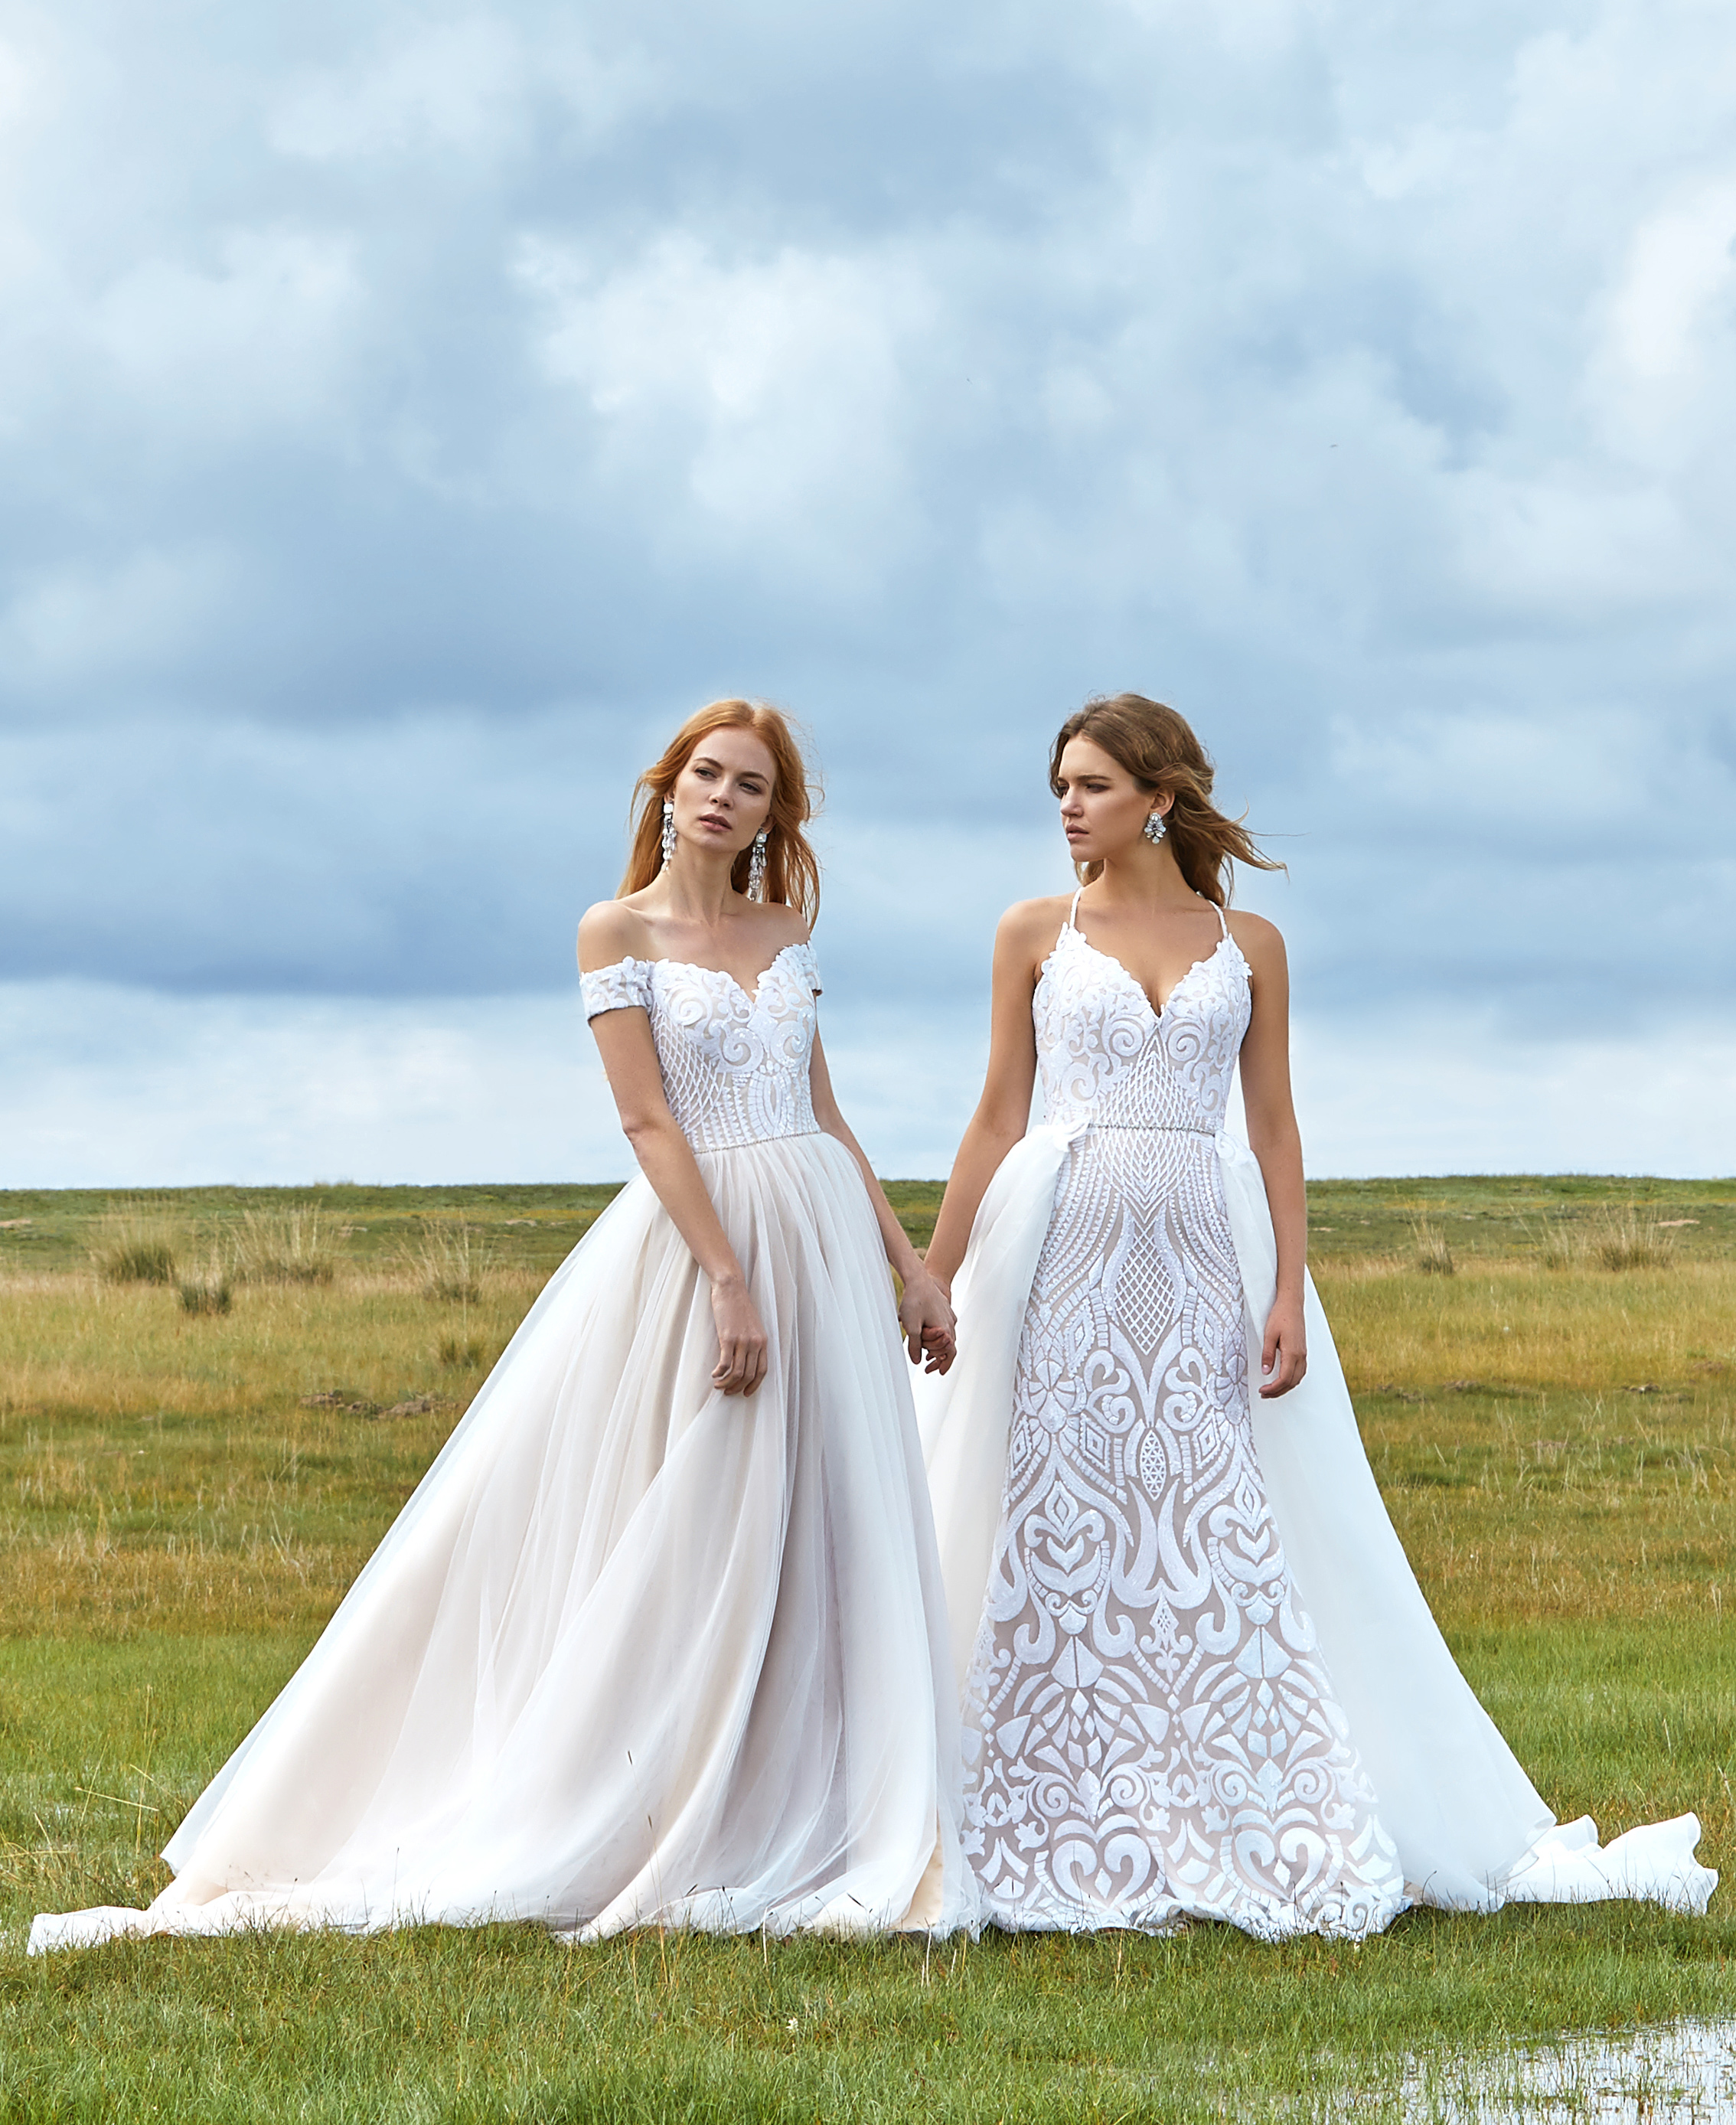 CocoMelody Introduced Their Captivating New Bridal Collection for